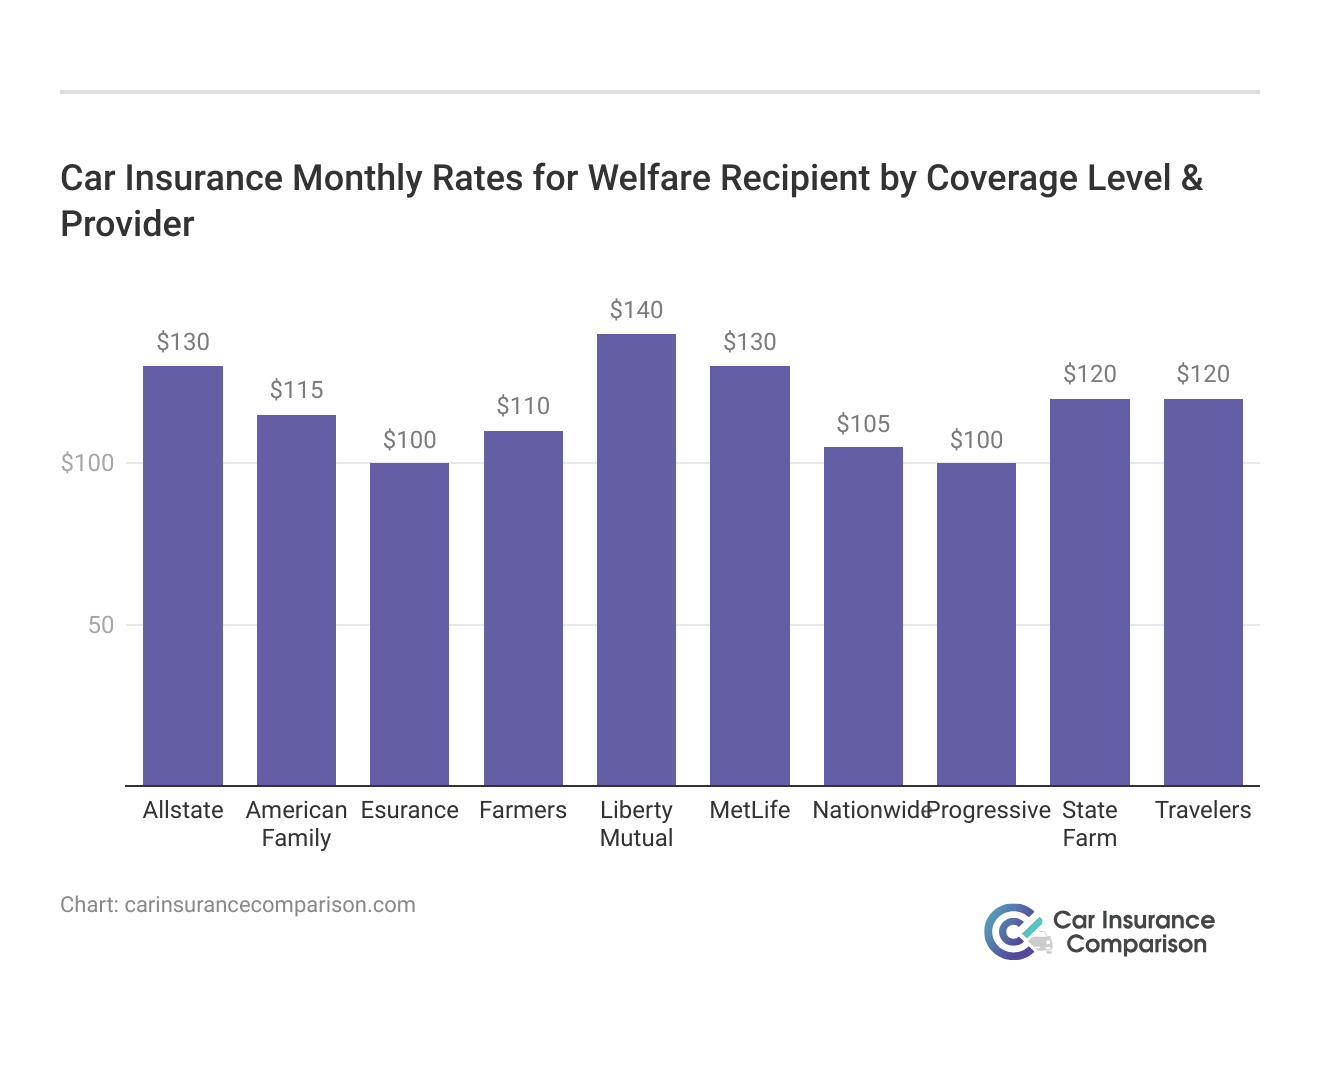 <h3>Car Insurance Monthly Rates for Welfare Recipient by Coverage Level & Provider</h3>